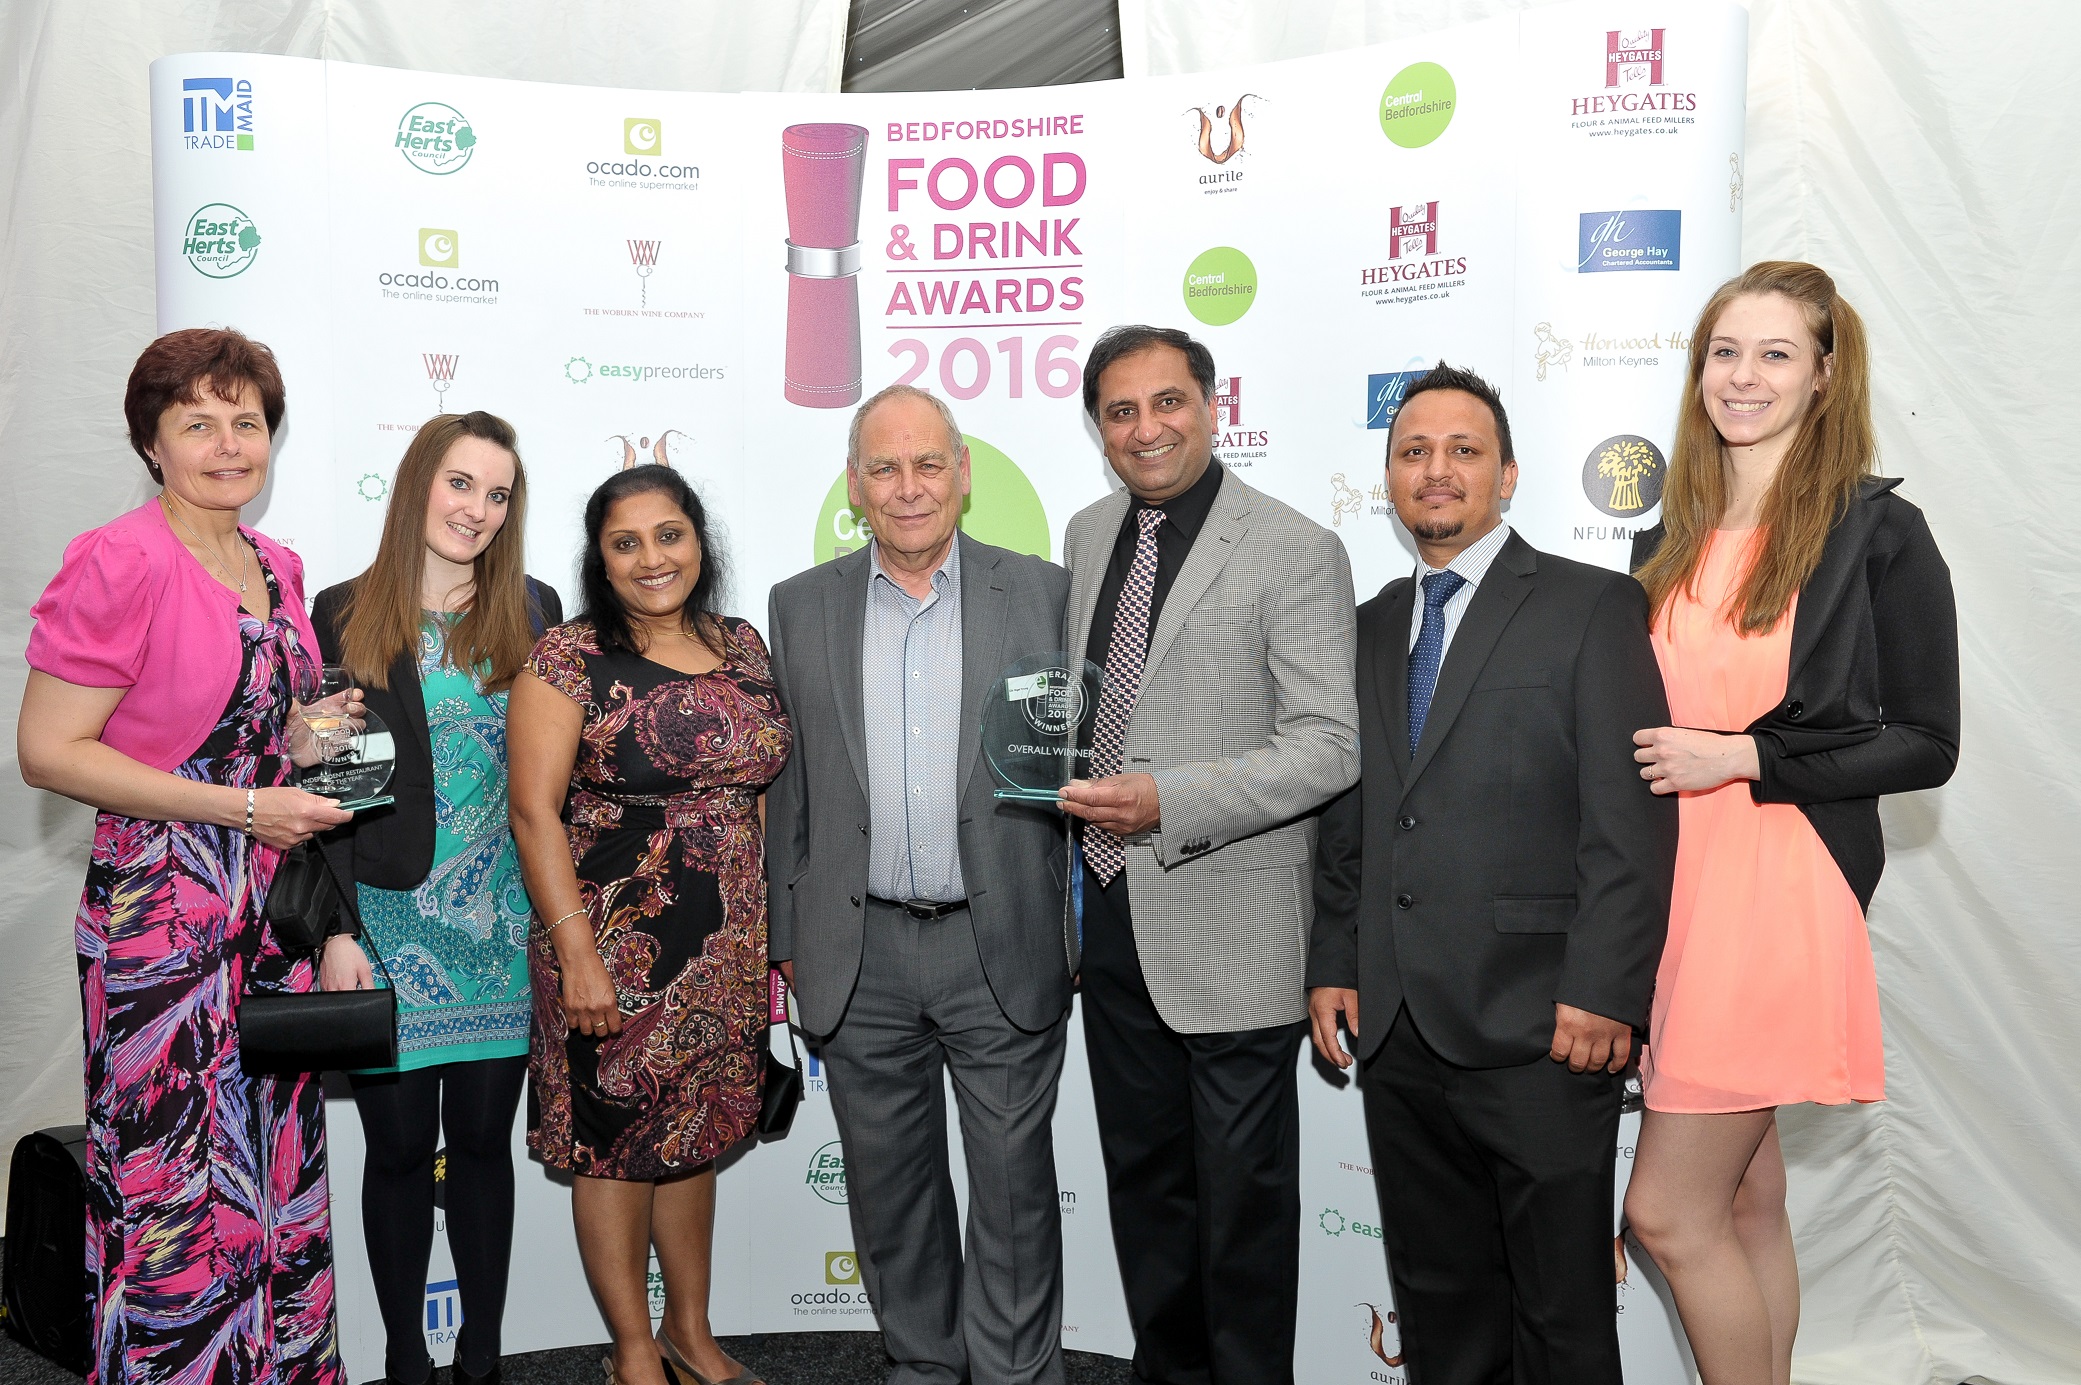 Central Bedfordshire business Go Houghton seizes overall title at the Bedfordshire Food and Drink Awards